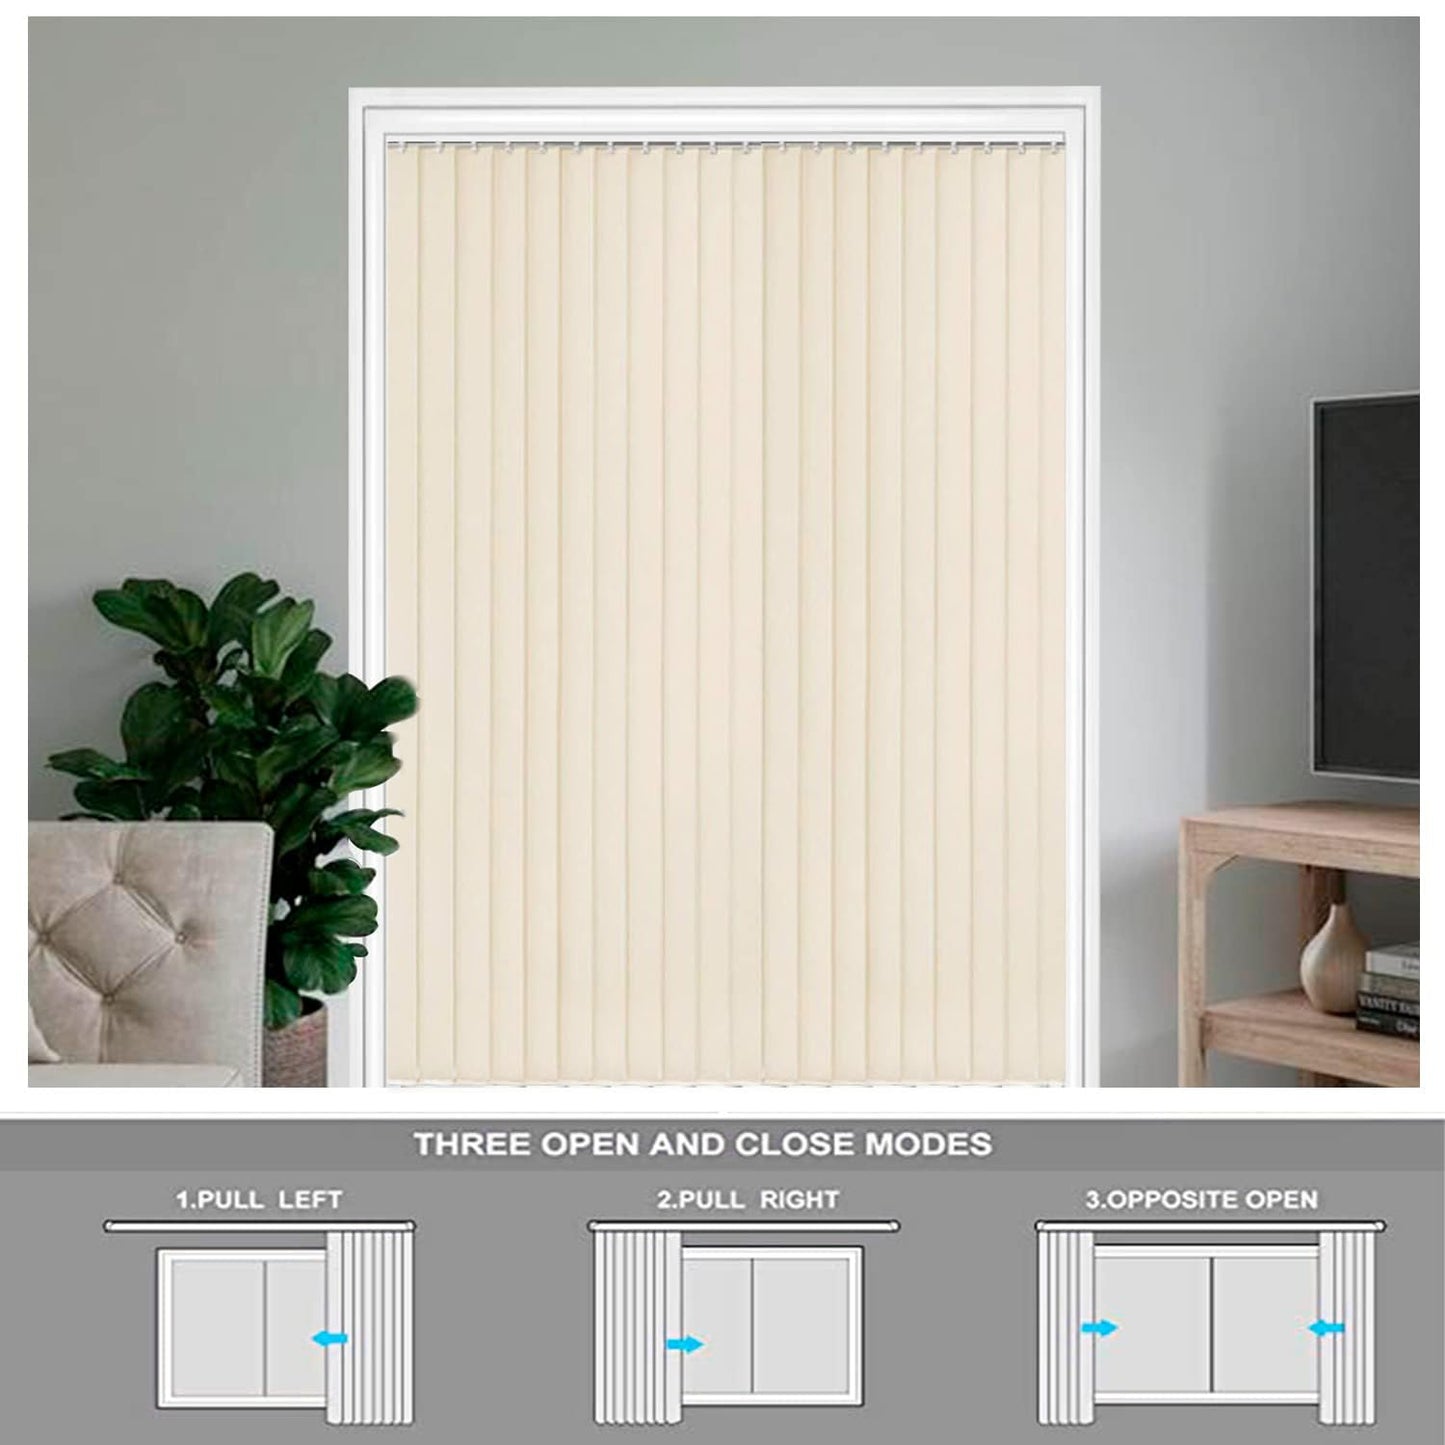 Kayra Decor Vertical Blinds for Windows - Vertical Blinds Curtain for Home - Bedroom, Kitchen, Sliding Door, and Balcony (Customized Size, Cream)